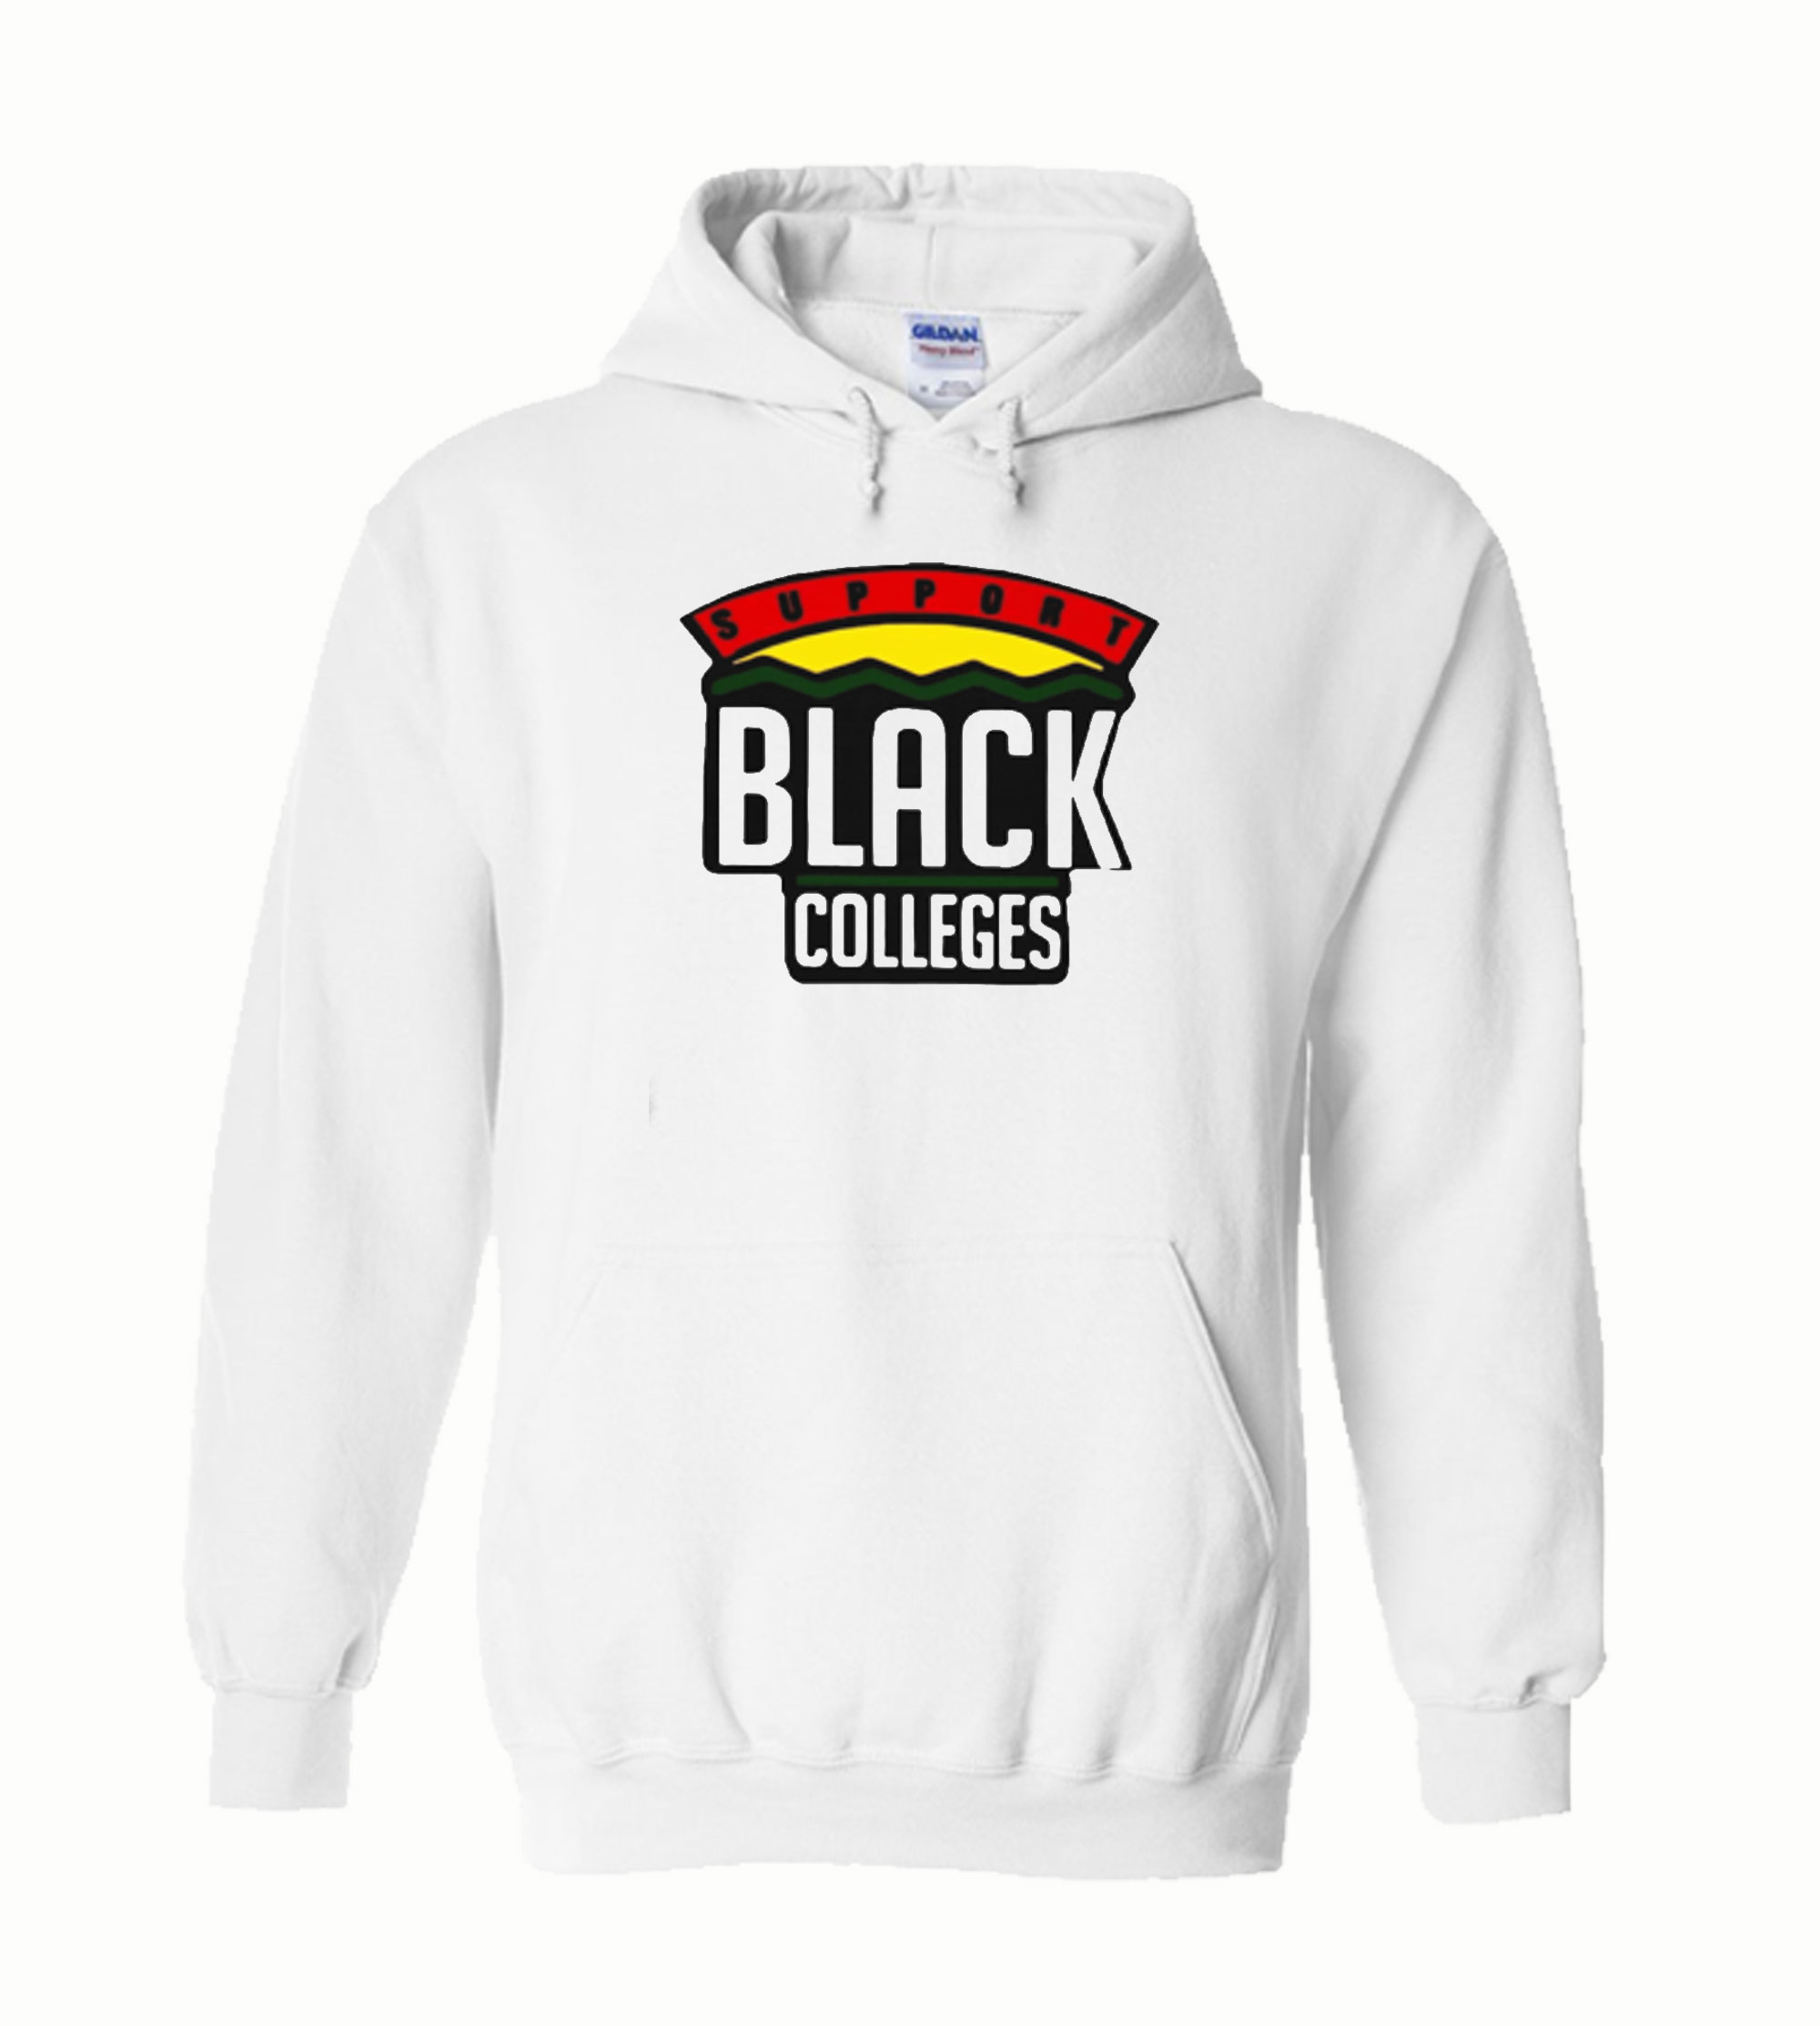 Support Black Colleges Shirt